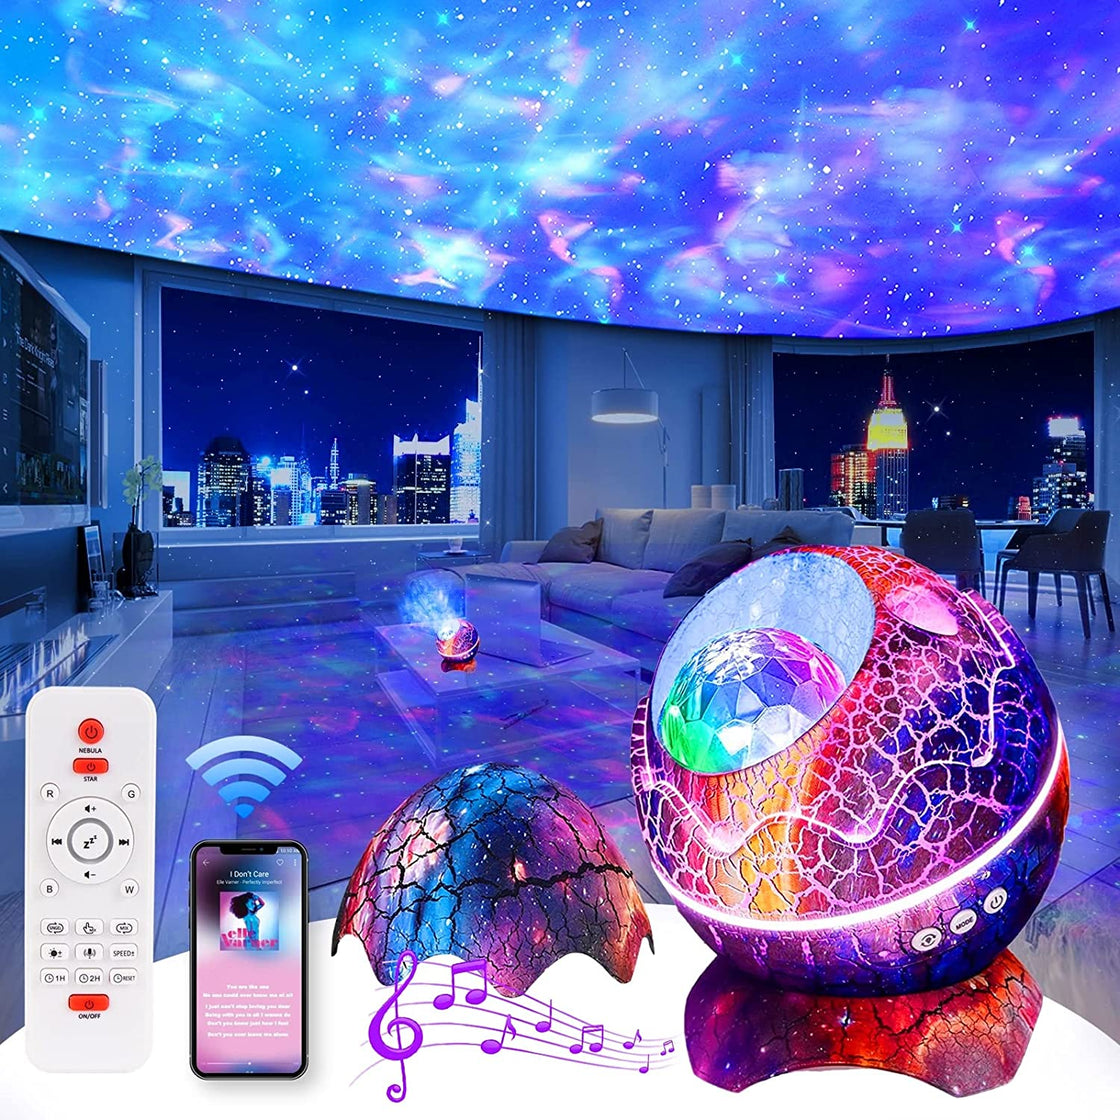 BESTY HOME Dinosaur Egg Star Projector, Galaxy Projector for